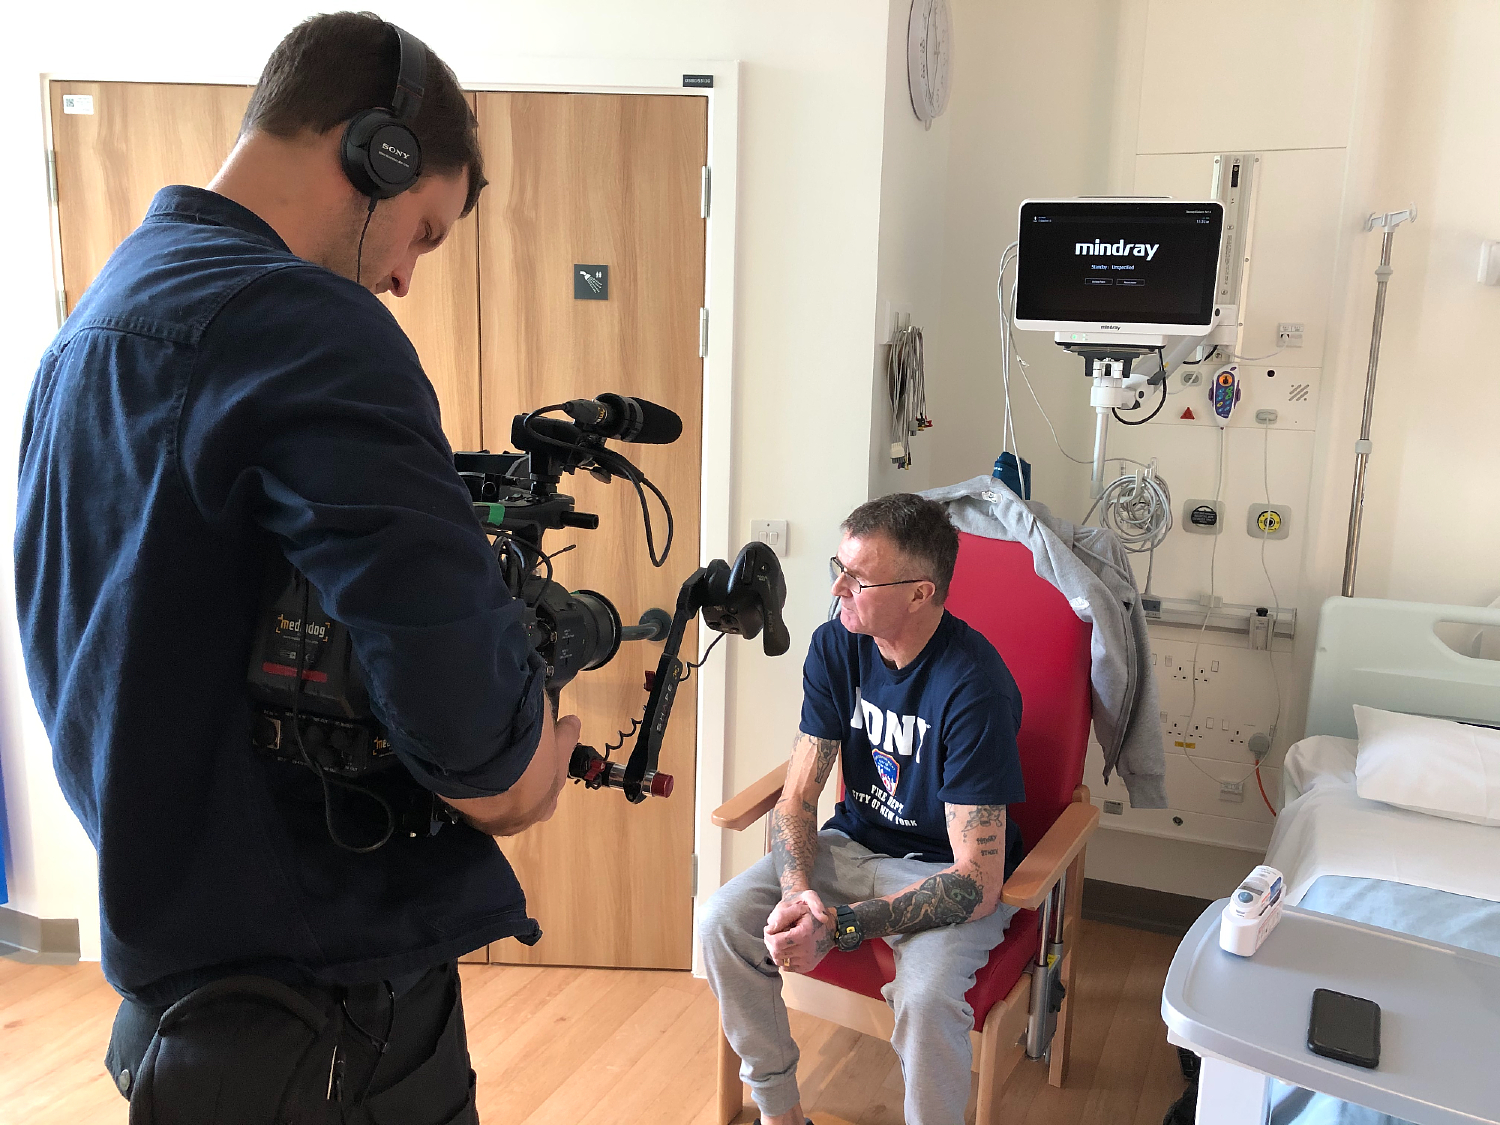 Kevin being filmed the day before his operation, which was in December 2019